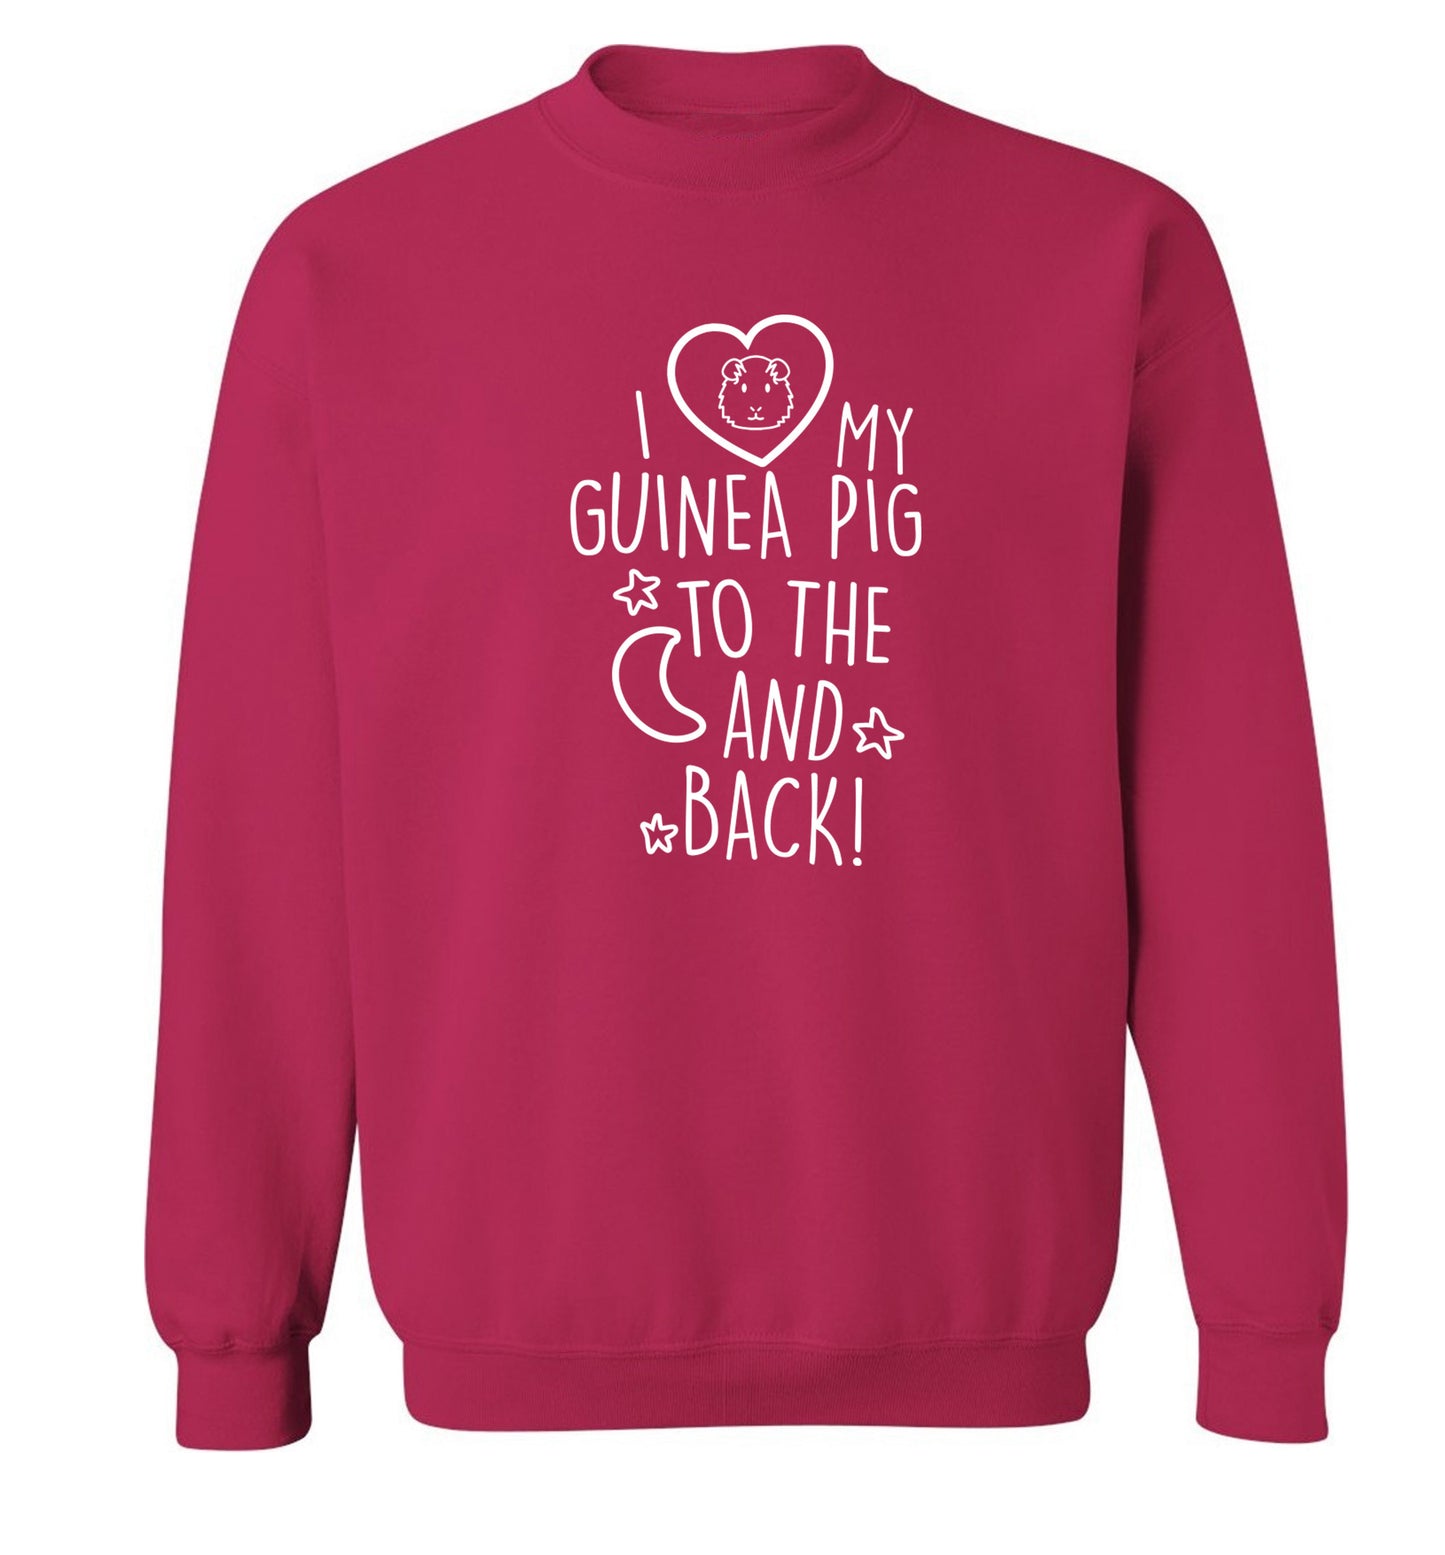 I love my guinea pig to the moon and back Adult's unisex pink  sweater XL